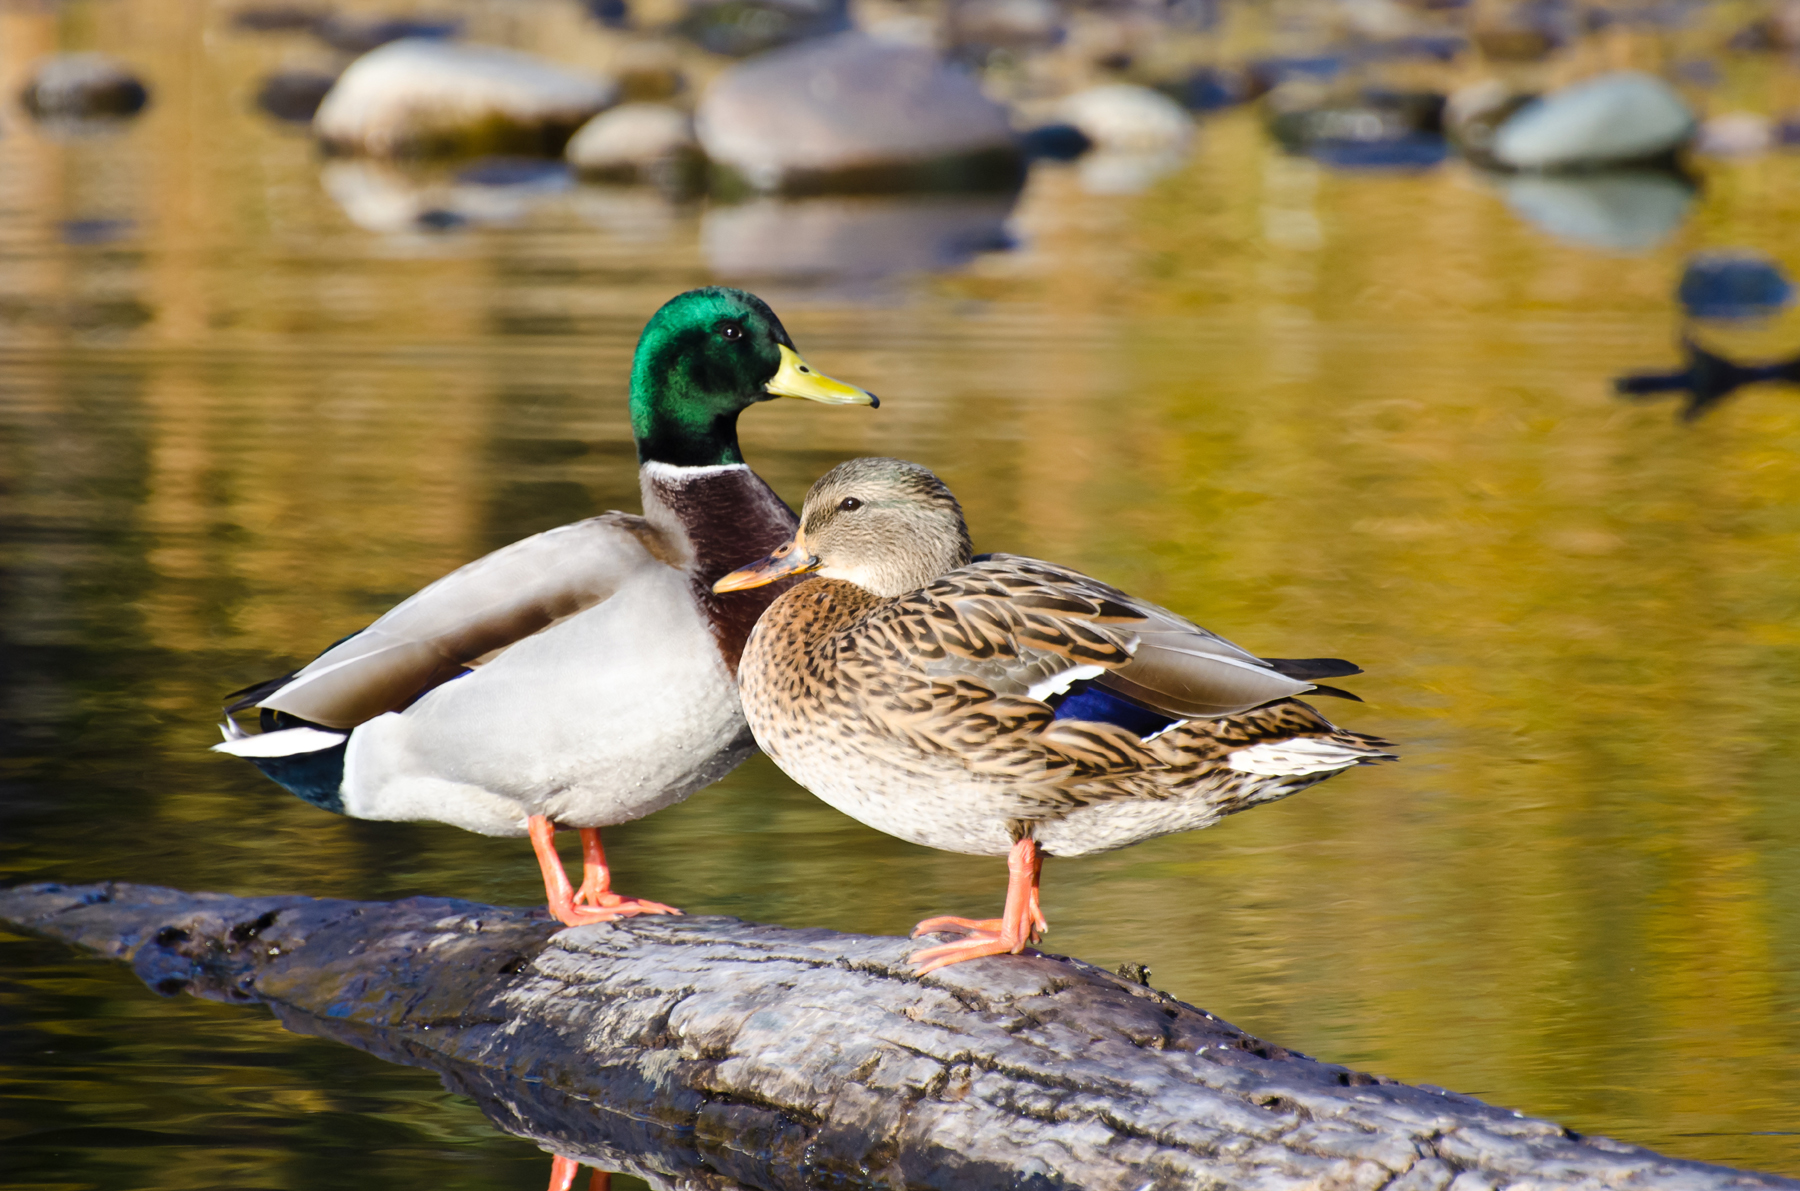 Wood resting on the two ducks 52497 - Birds photo - Animal